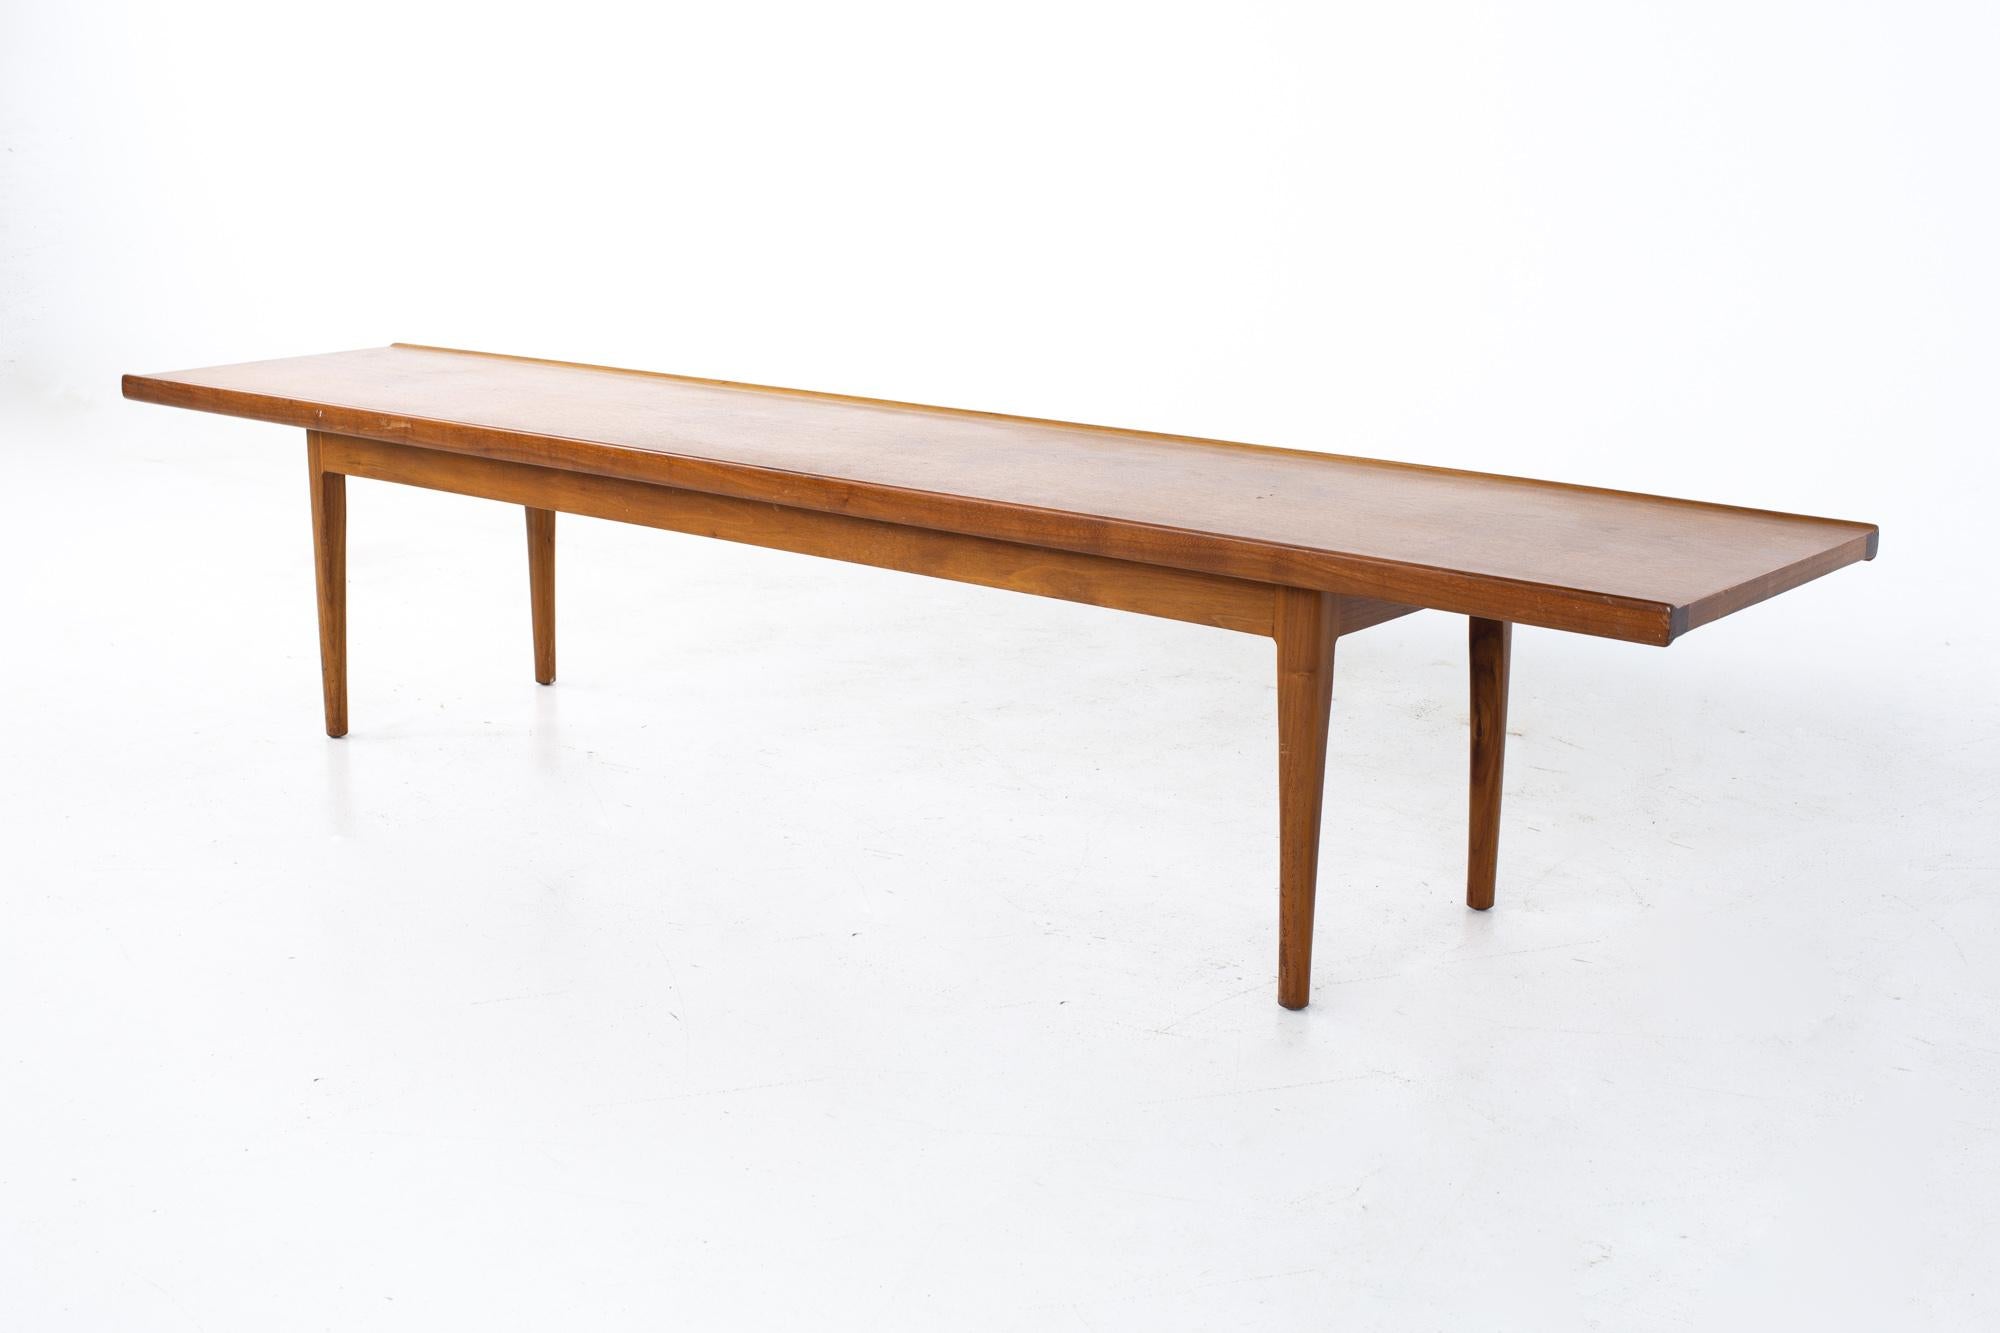 Kipp Stewart for Drexel Declaration mid century long walnut coffee table
Table measures: 75 wide x 16 deep x 15.5 inches high

All pieces of furniture can be had in what we call restored vintage condition. That means the piece is restored upon